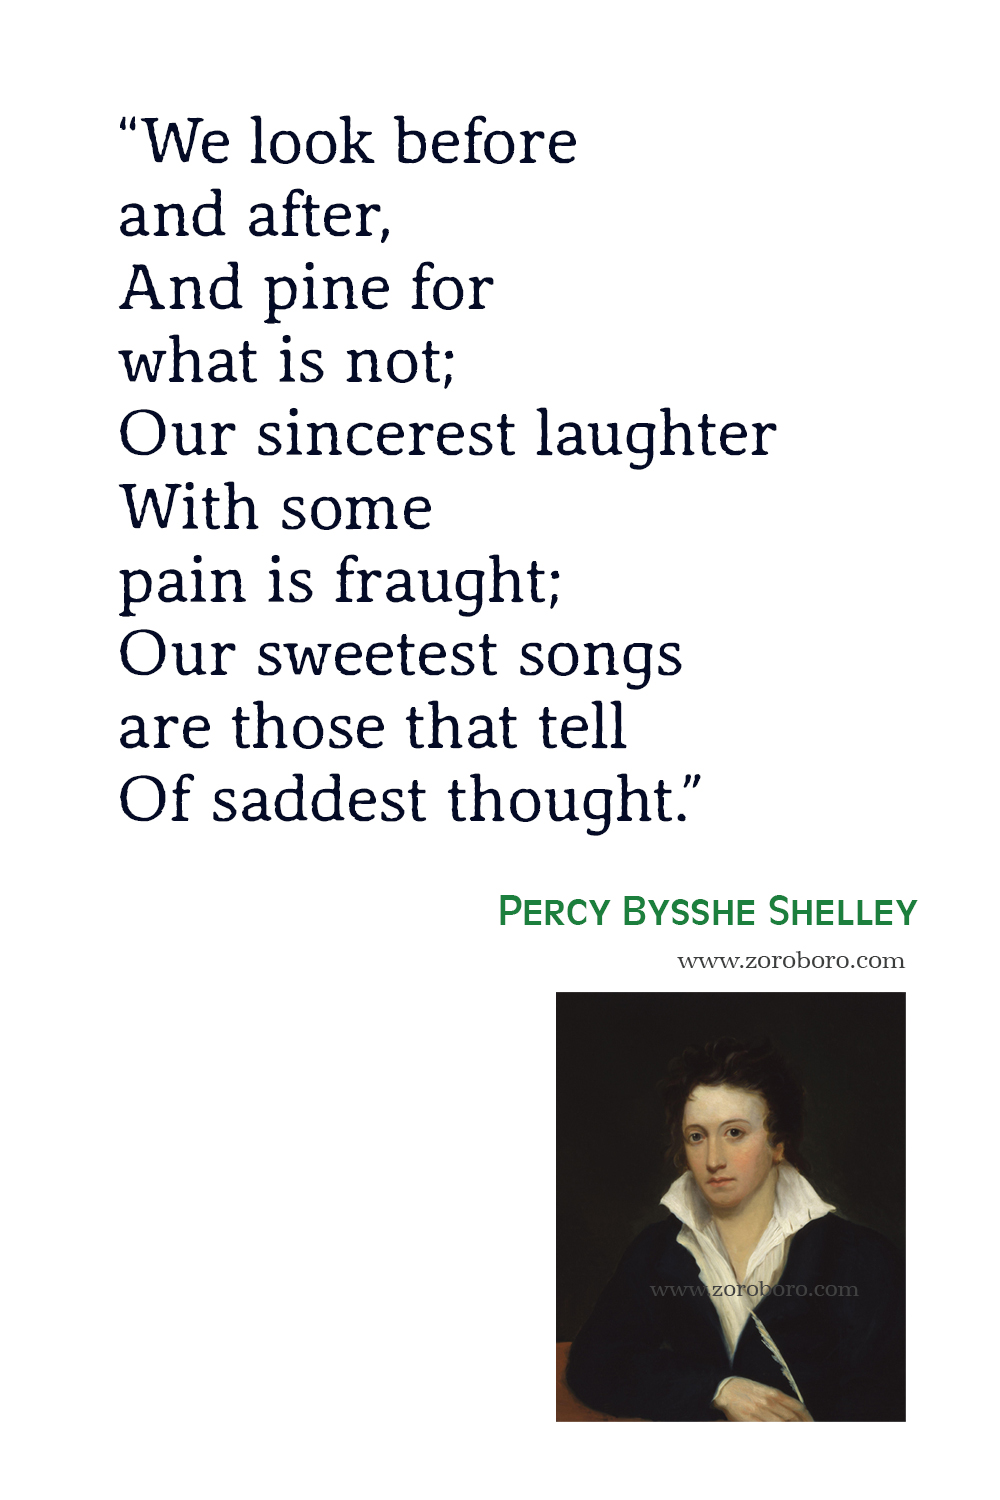 Percy Bysshe Shelley Quotes, Percy Bysshe Shelley Poems, Percy Bysshe Shelley Poetry, Percy Bysshe Shelley Books Short Poems.